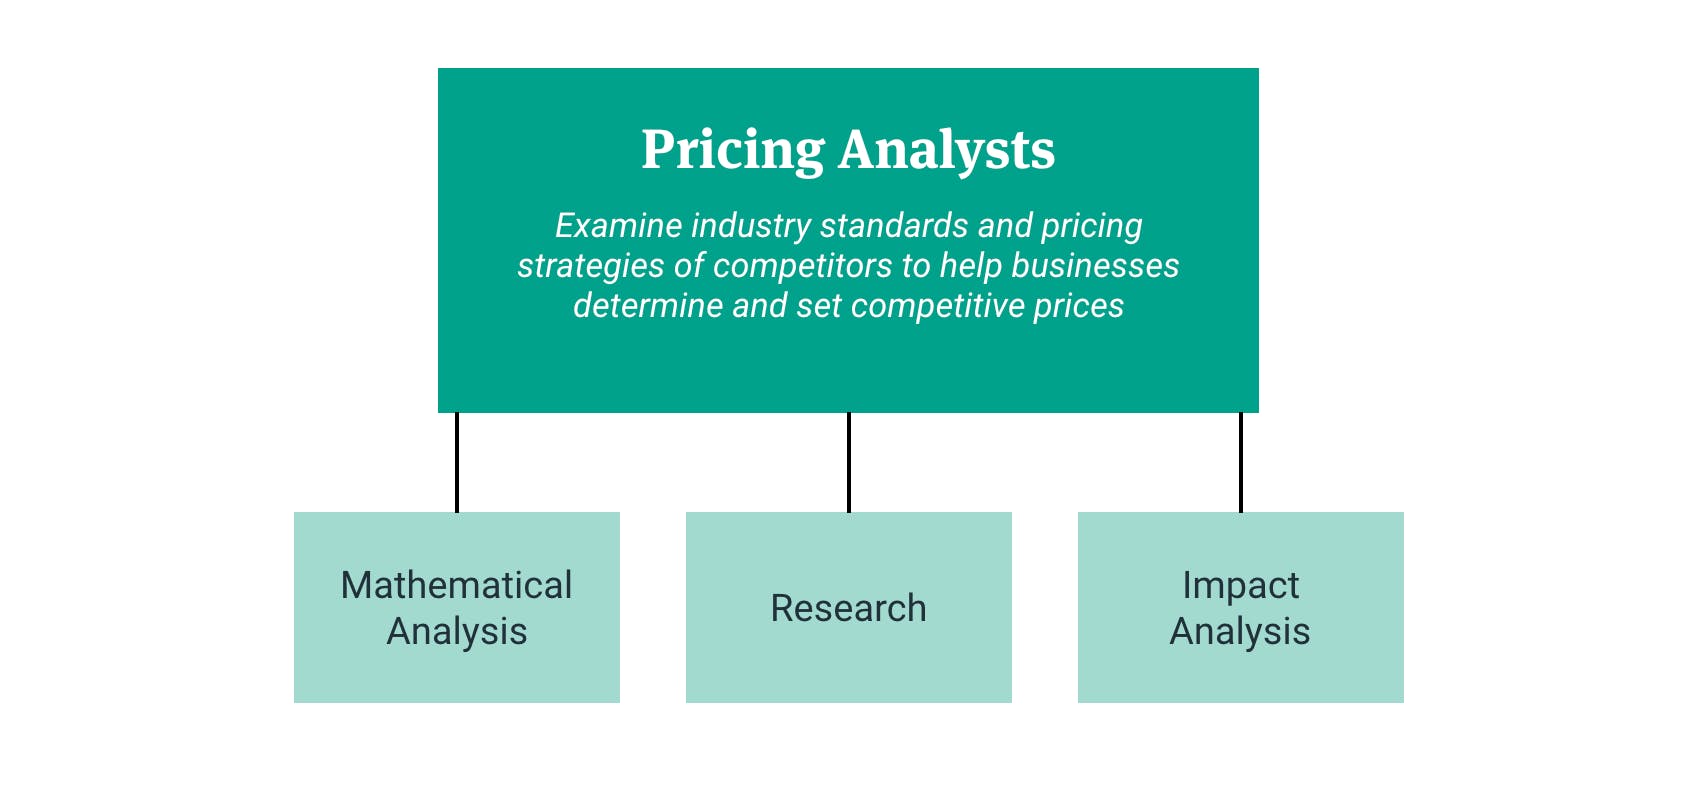 Pricing analysts: examine industry stands and pricing strategies of competitors to help businesses determine and set competitive prices